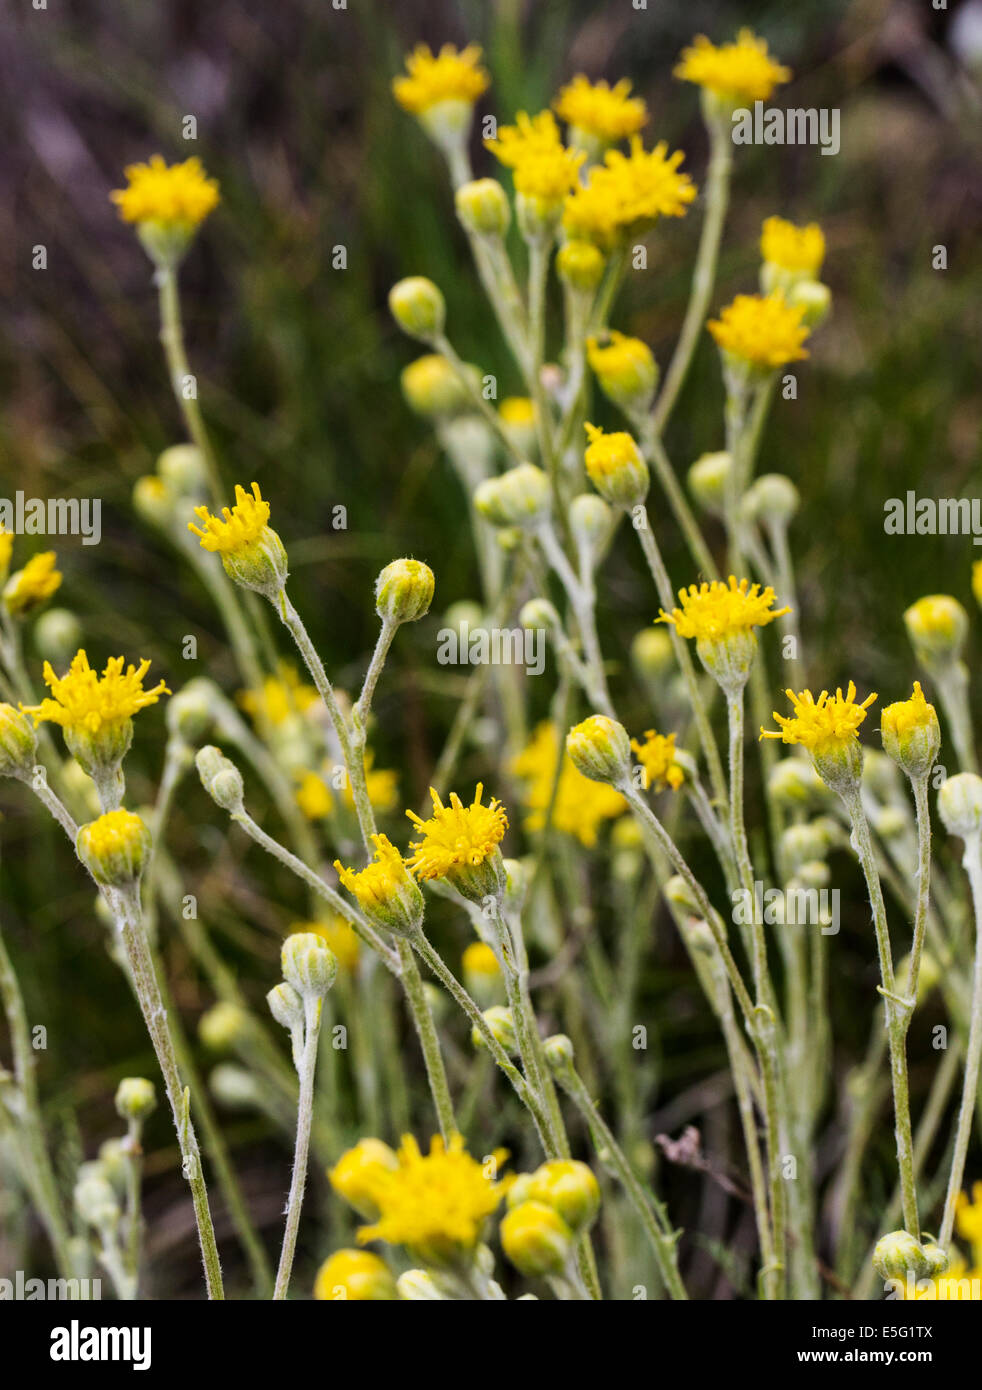 Hymenopappus filifolius; Asteraceae; Sunflower Family; Dusty Maiden; wildflowers in bloom, Central Colorado, USA Stock Photo